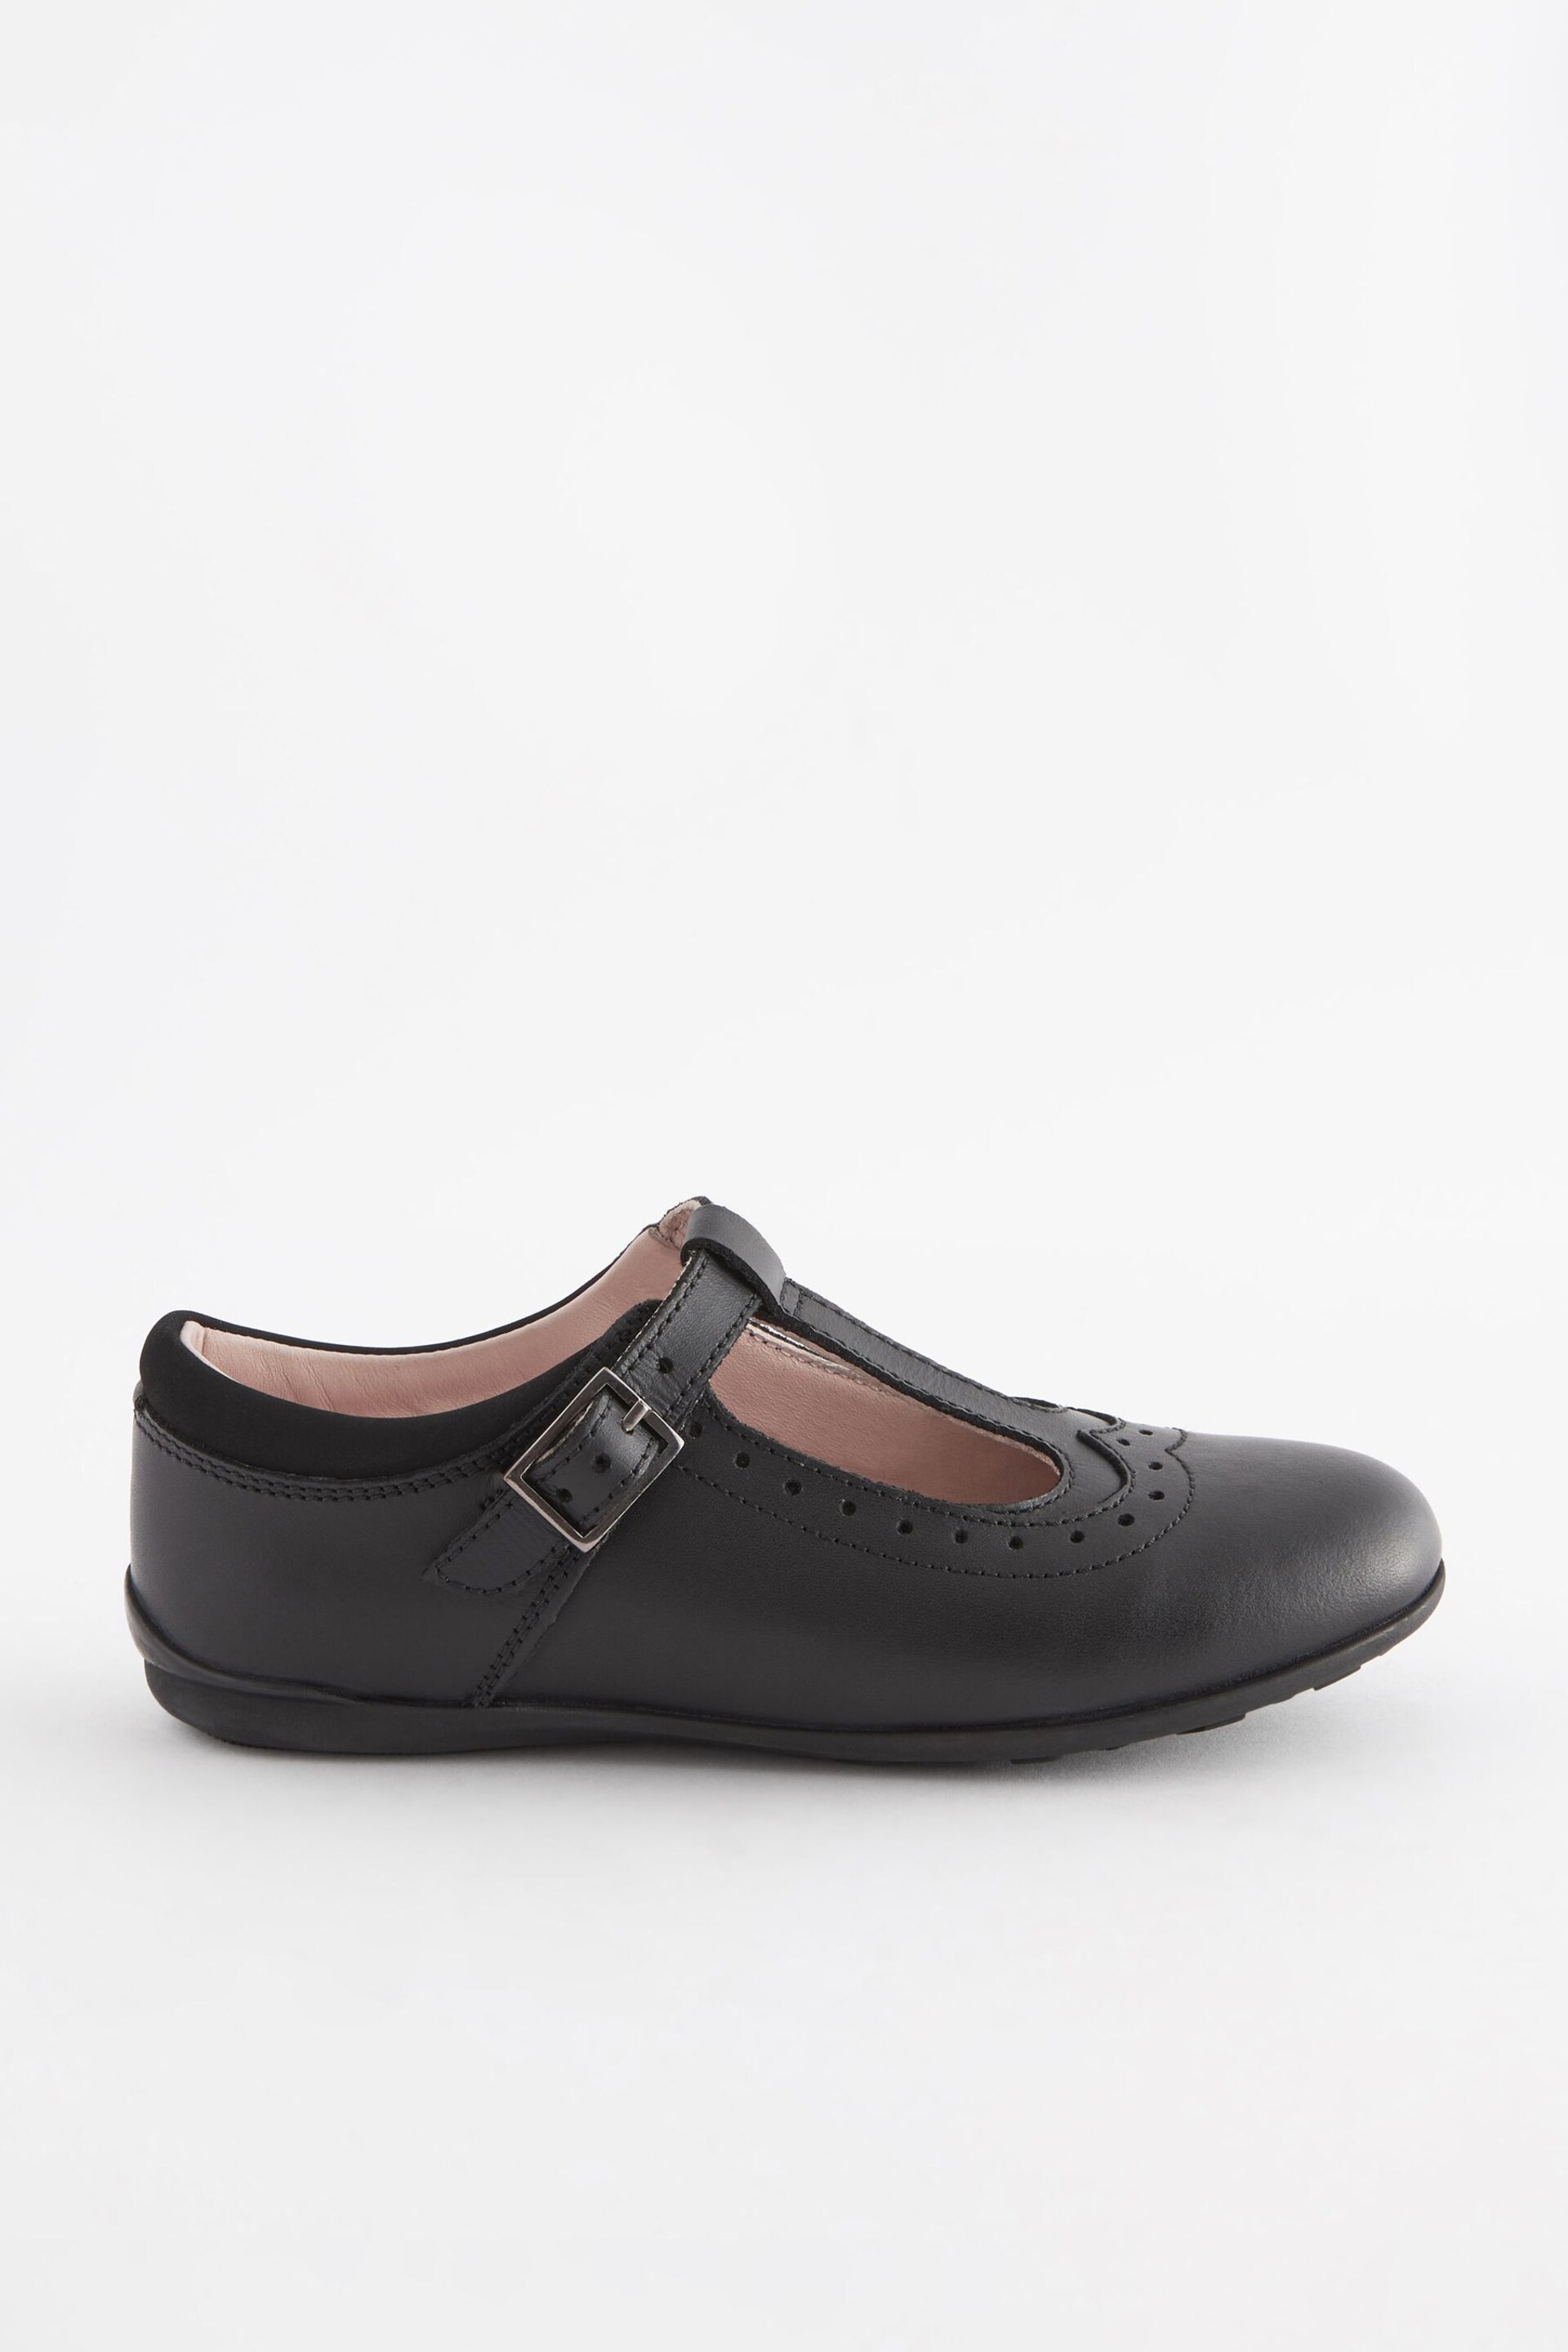 Black Standard Fit (F) Leather T-Bar Leather Shoes - Image 2 of 5